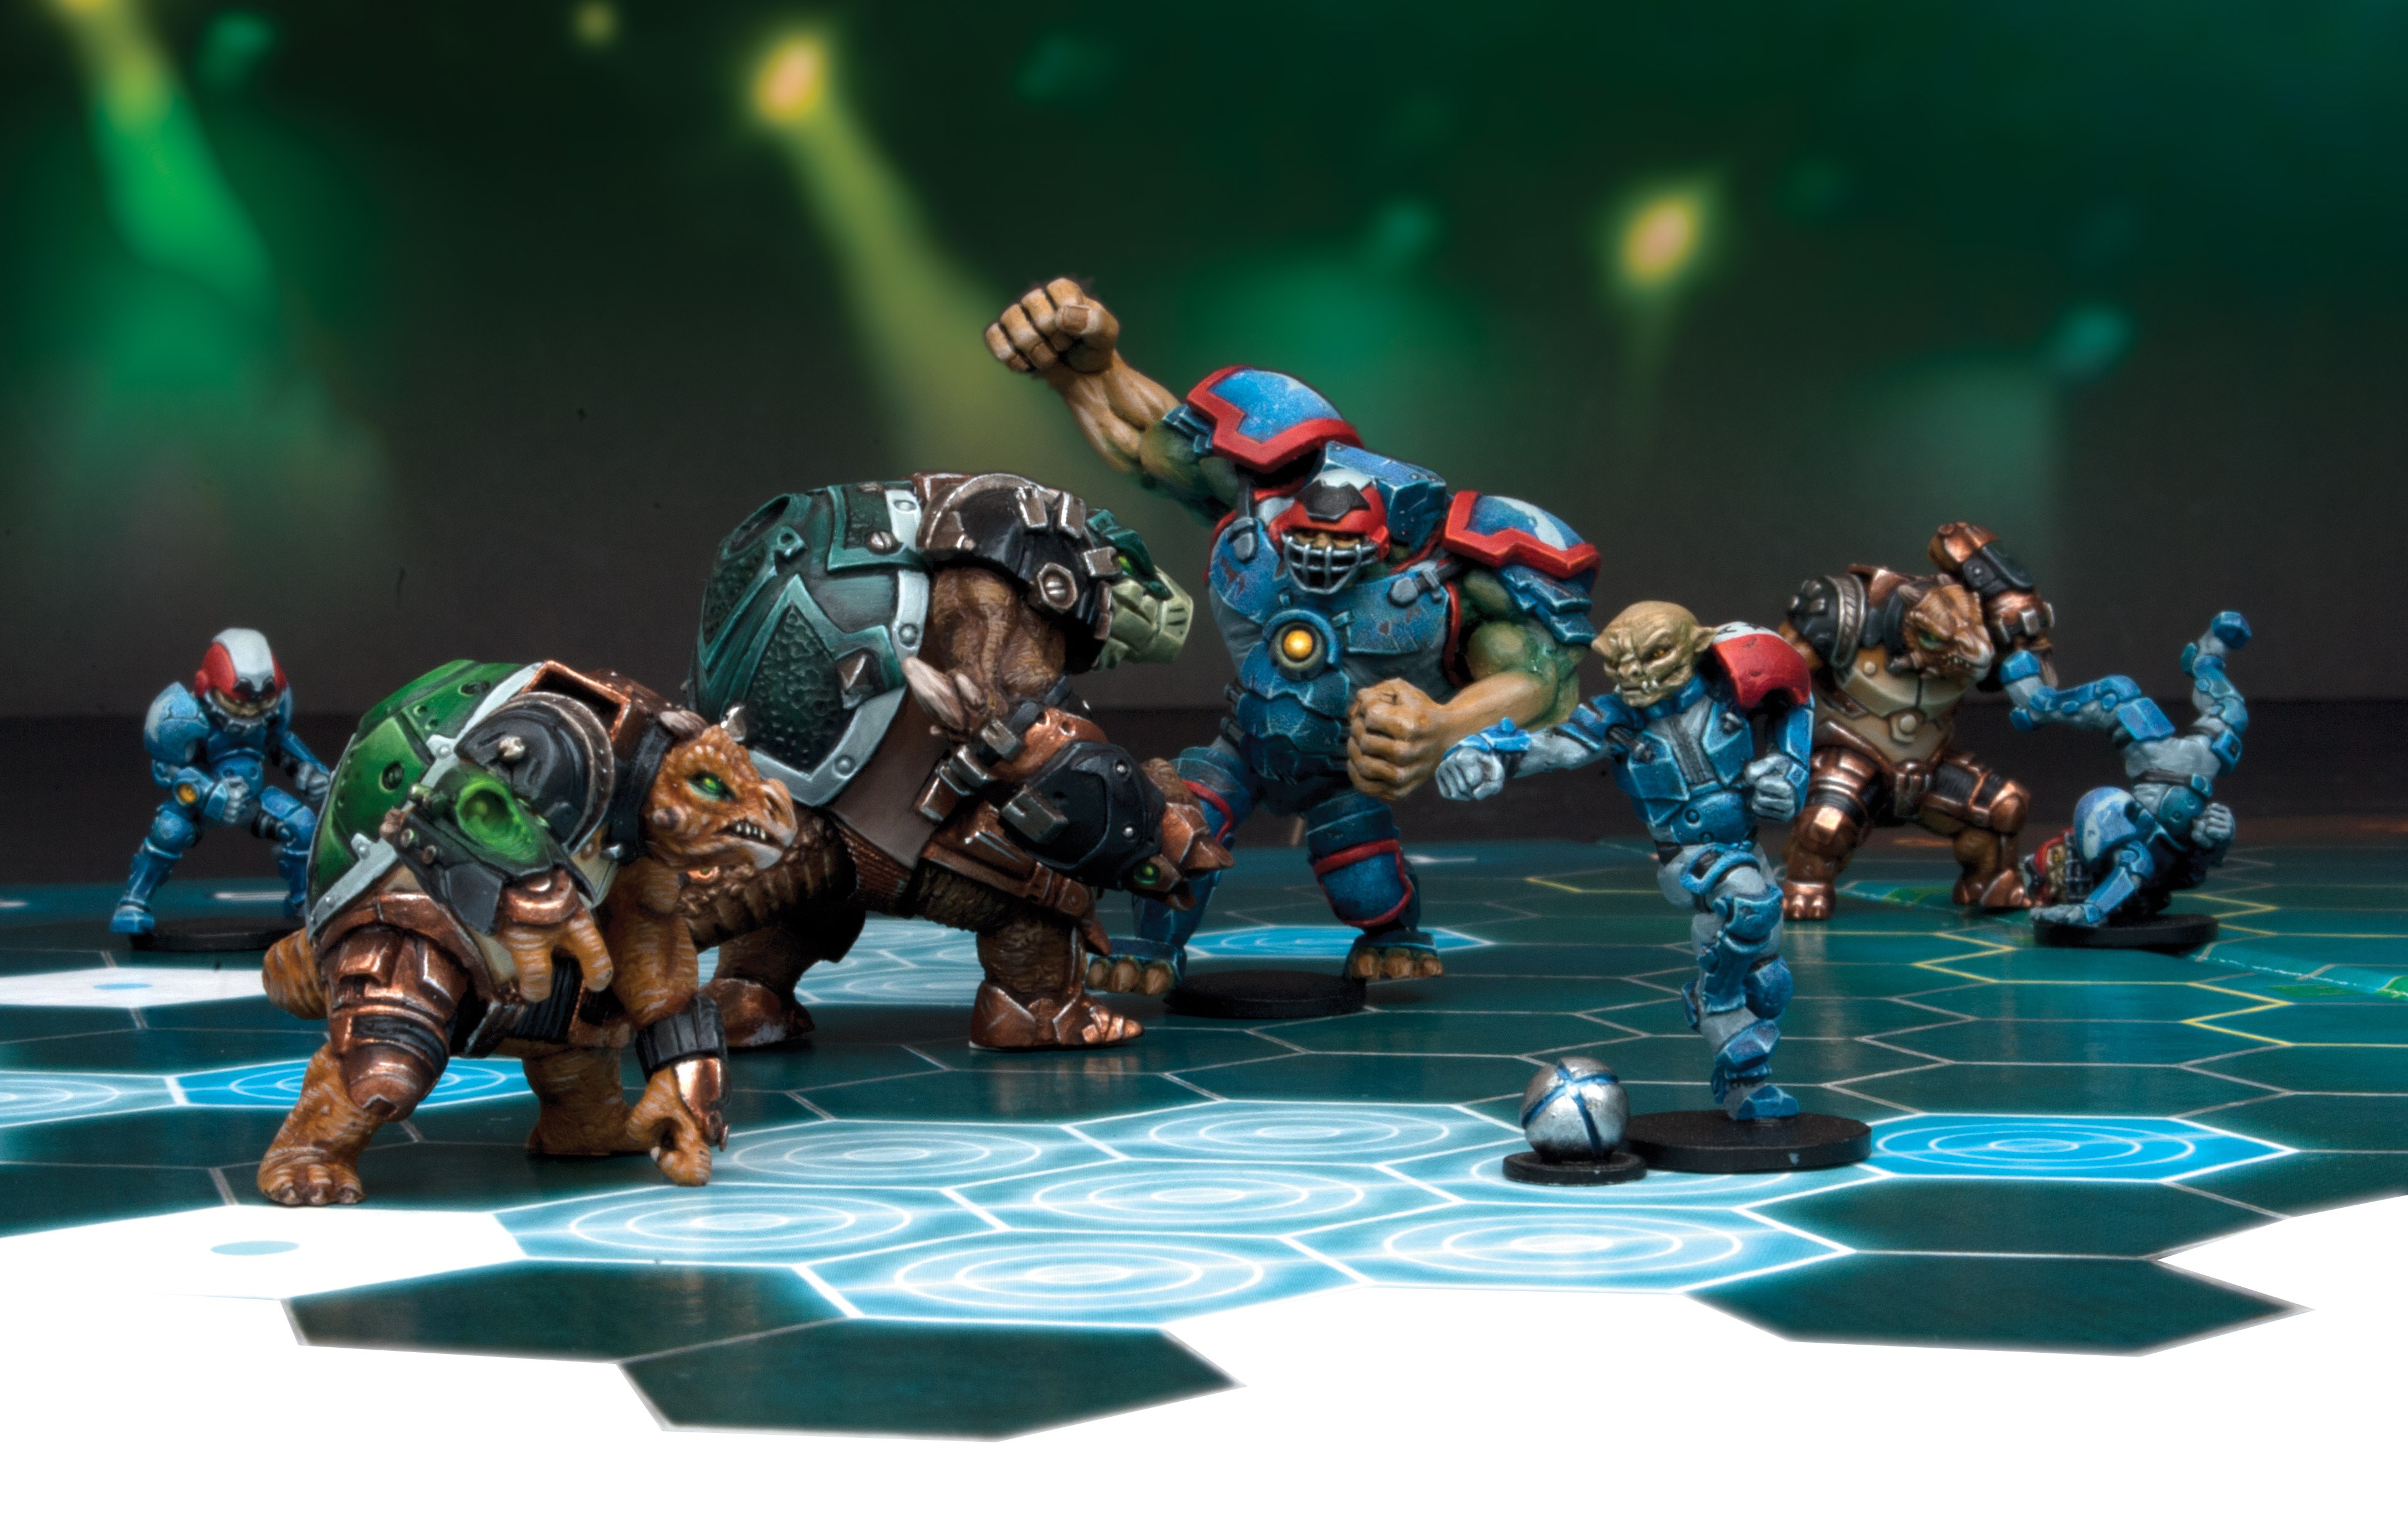 5 Reasons Why We Think You’re Going To Love DreadBall 2